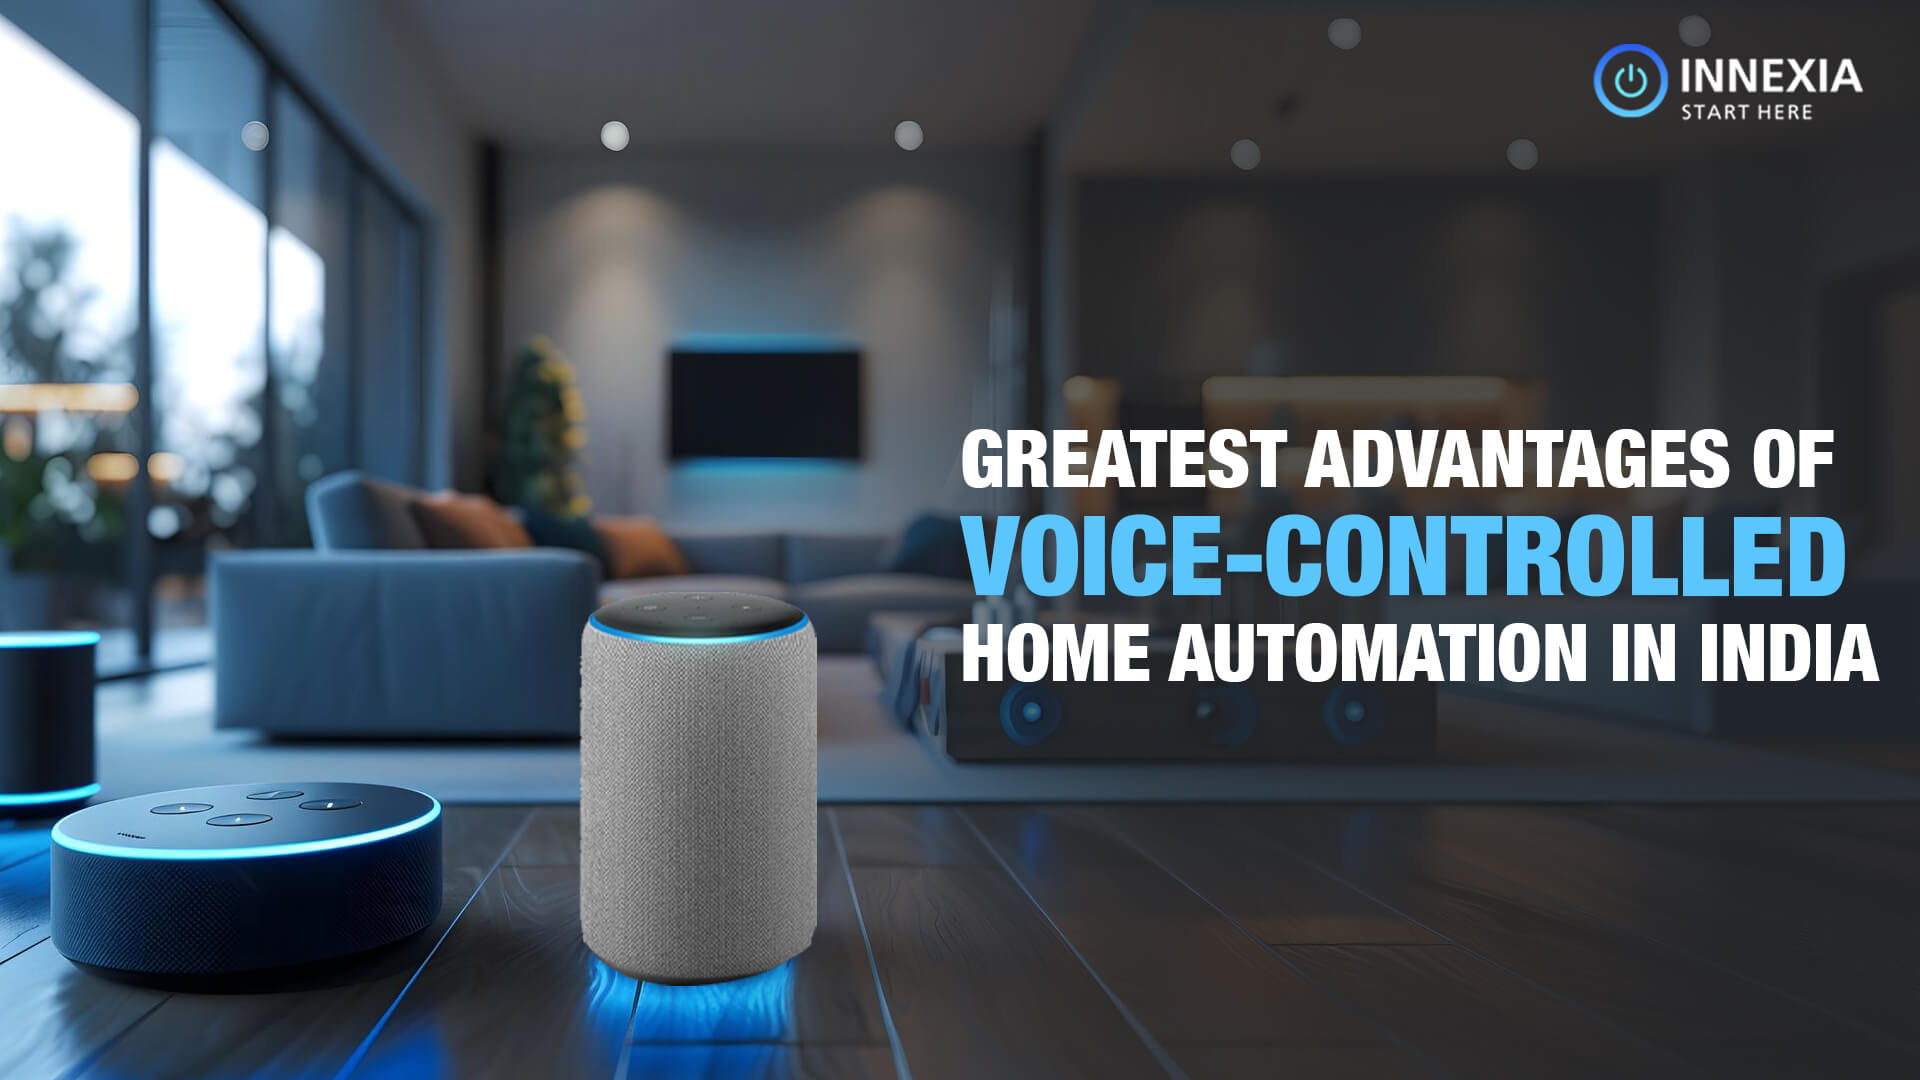 Advantages Of Voice-Controlled Home Automation Company in India